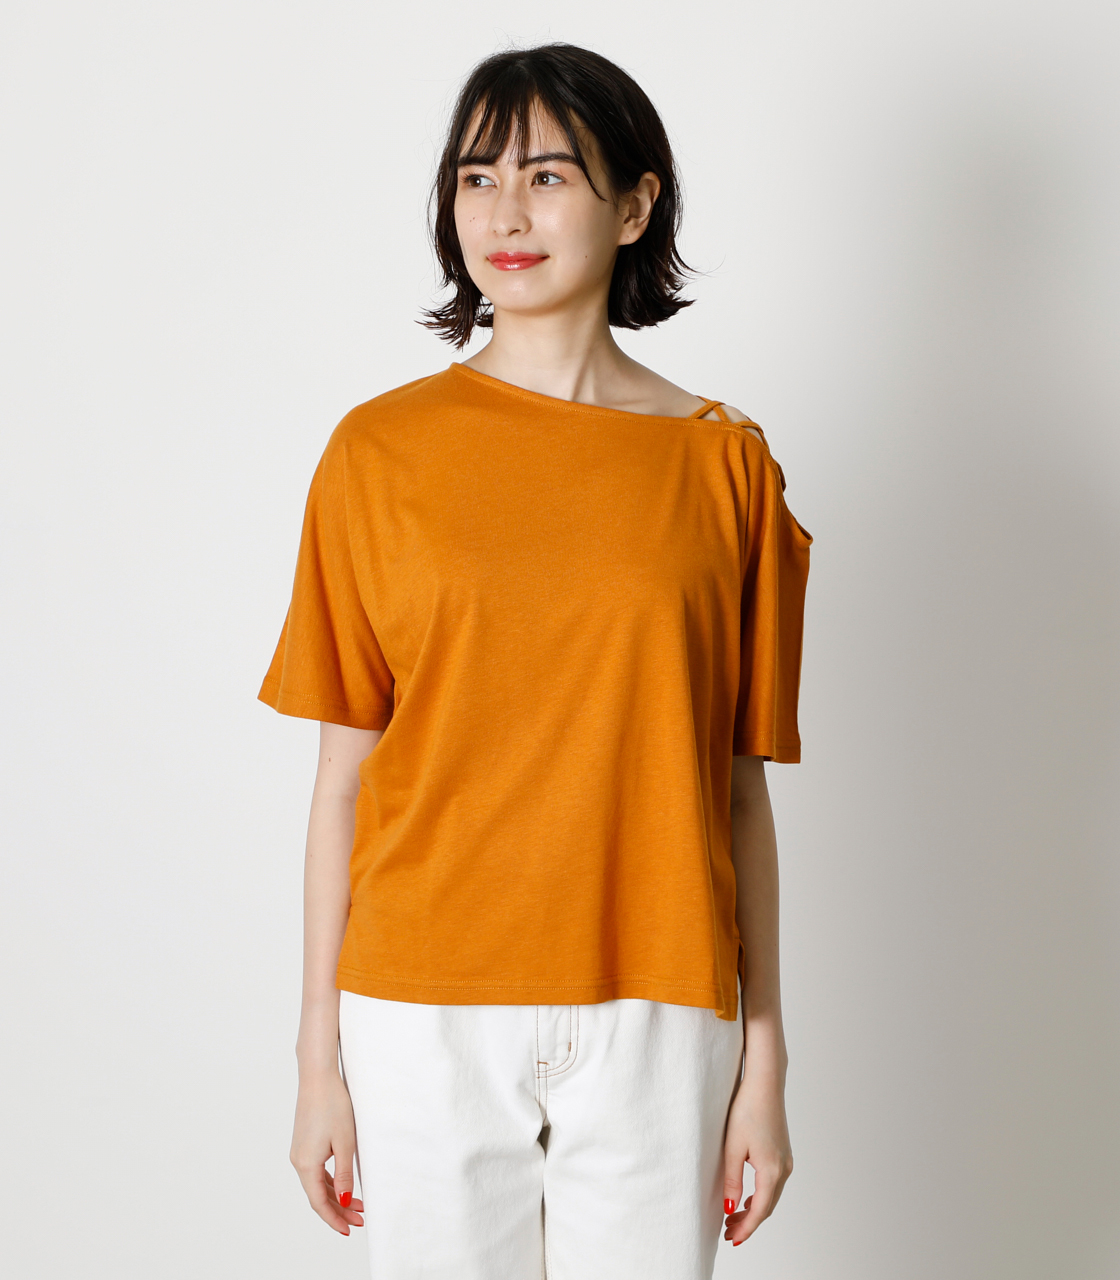 SHOULDER LACE UP TOPS/ショルダーレースアップトップス 詳細画像 D/YEL 4